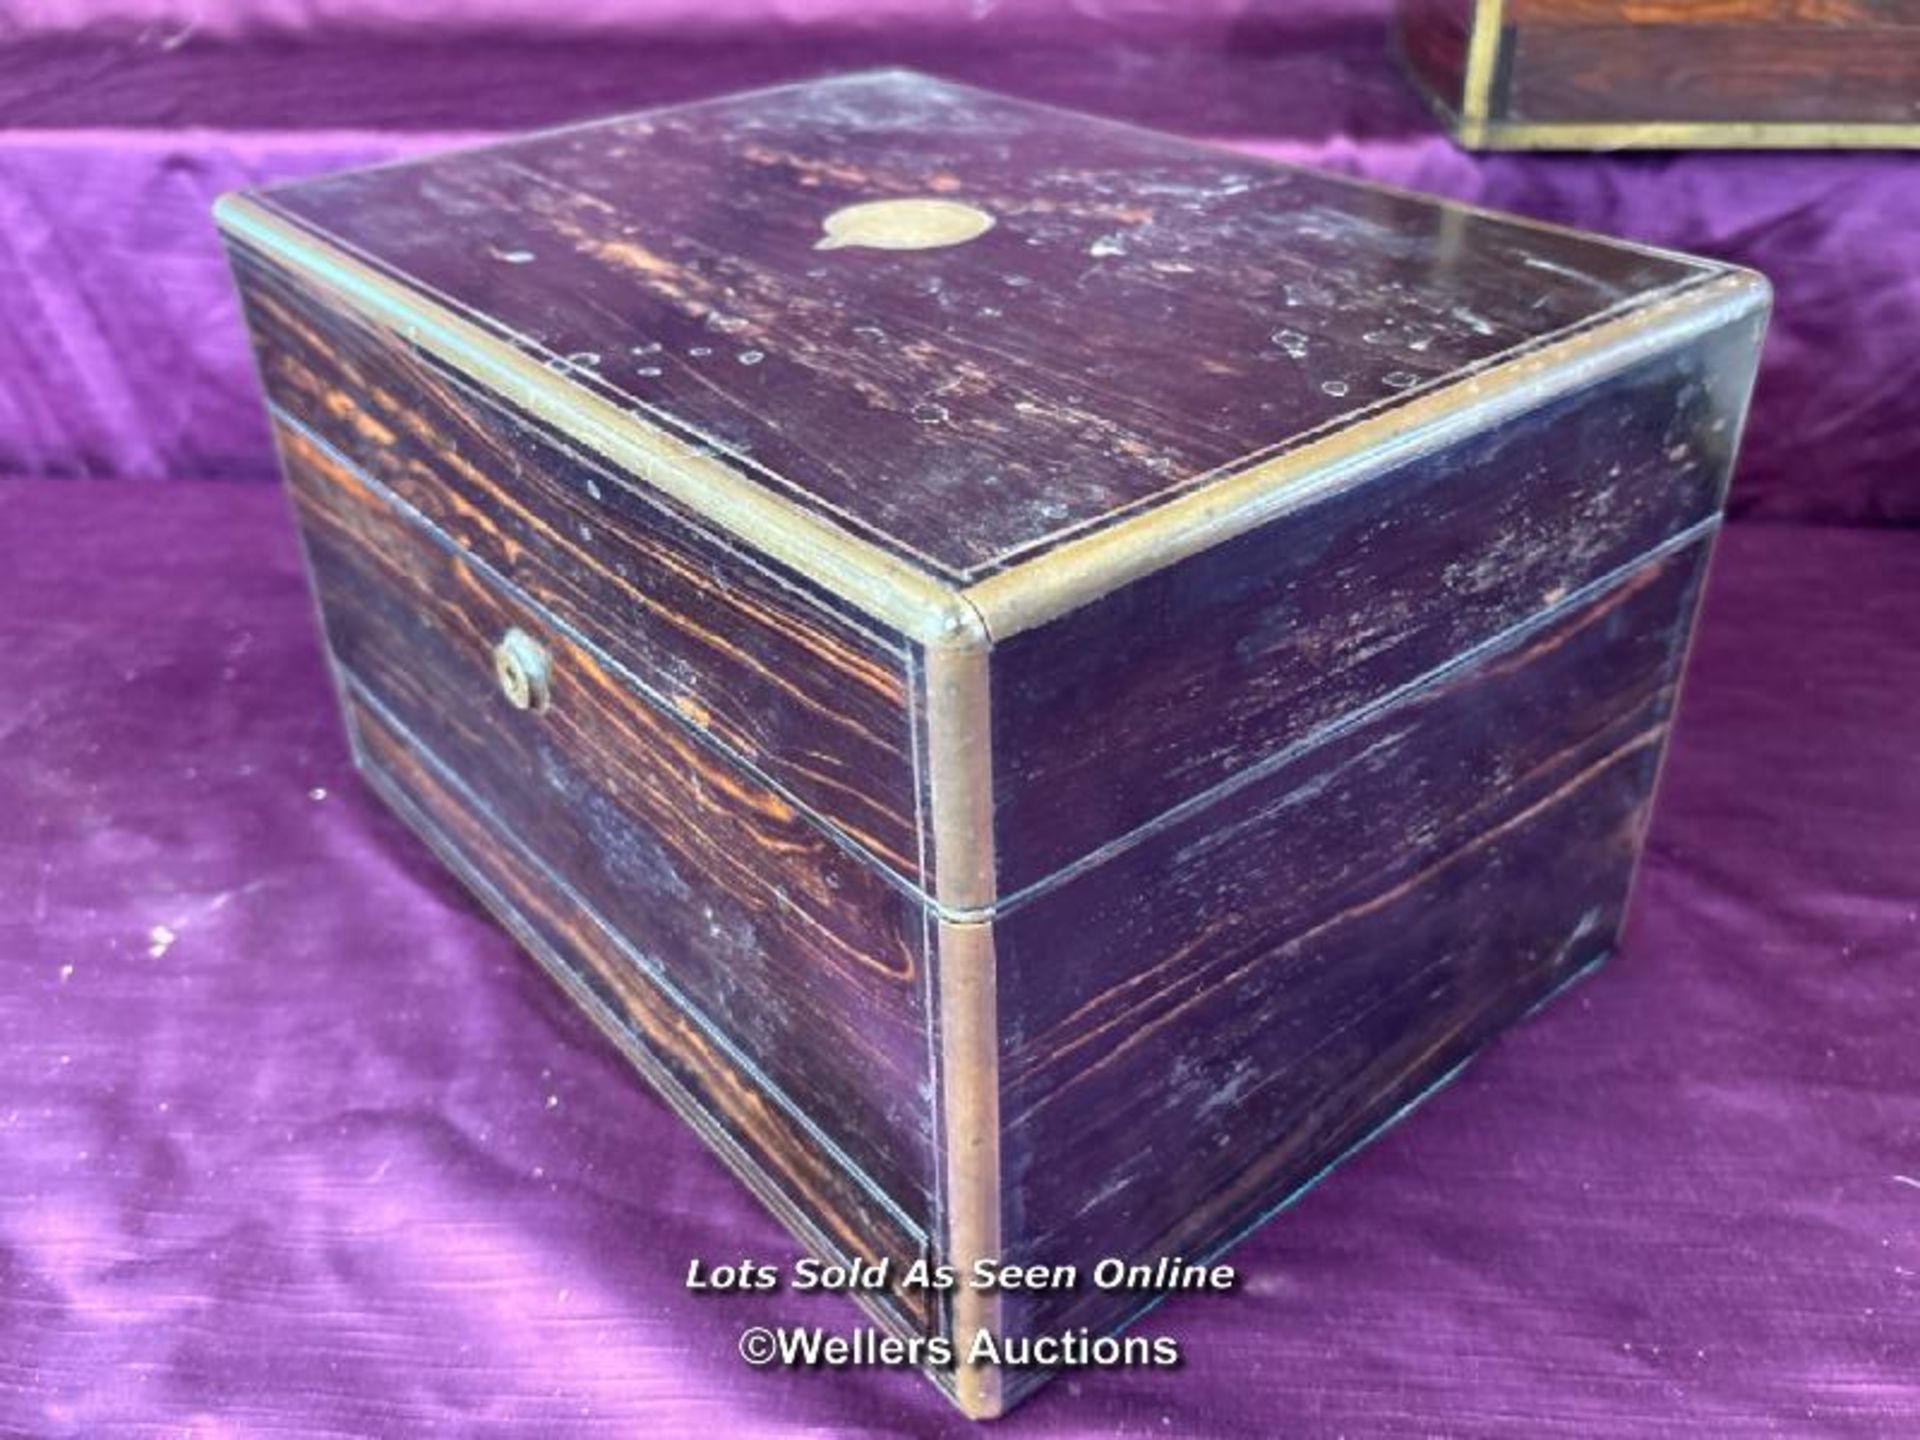 EARLY 19TH CENTURY GENTLEMAN'S VANITY BOX CONTAINING STERLING SILVER AND GLASS CONTAINERS WITH - Image 14 of 14